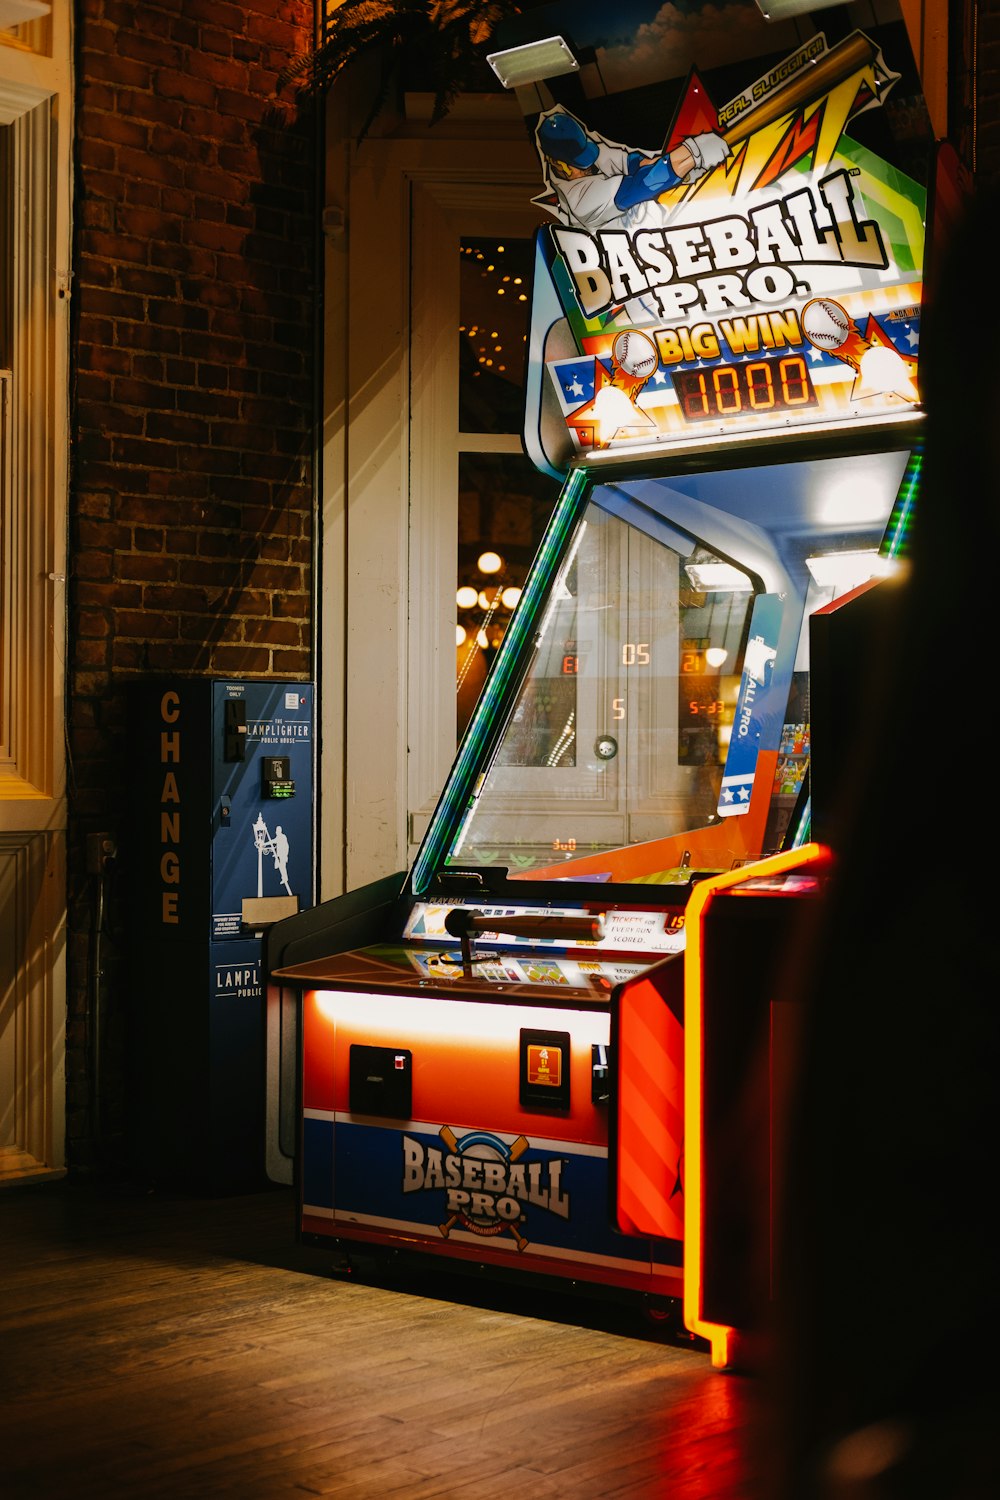 a game machine sitting on top of a hard wood floor